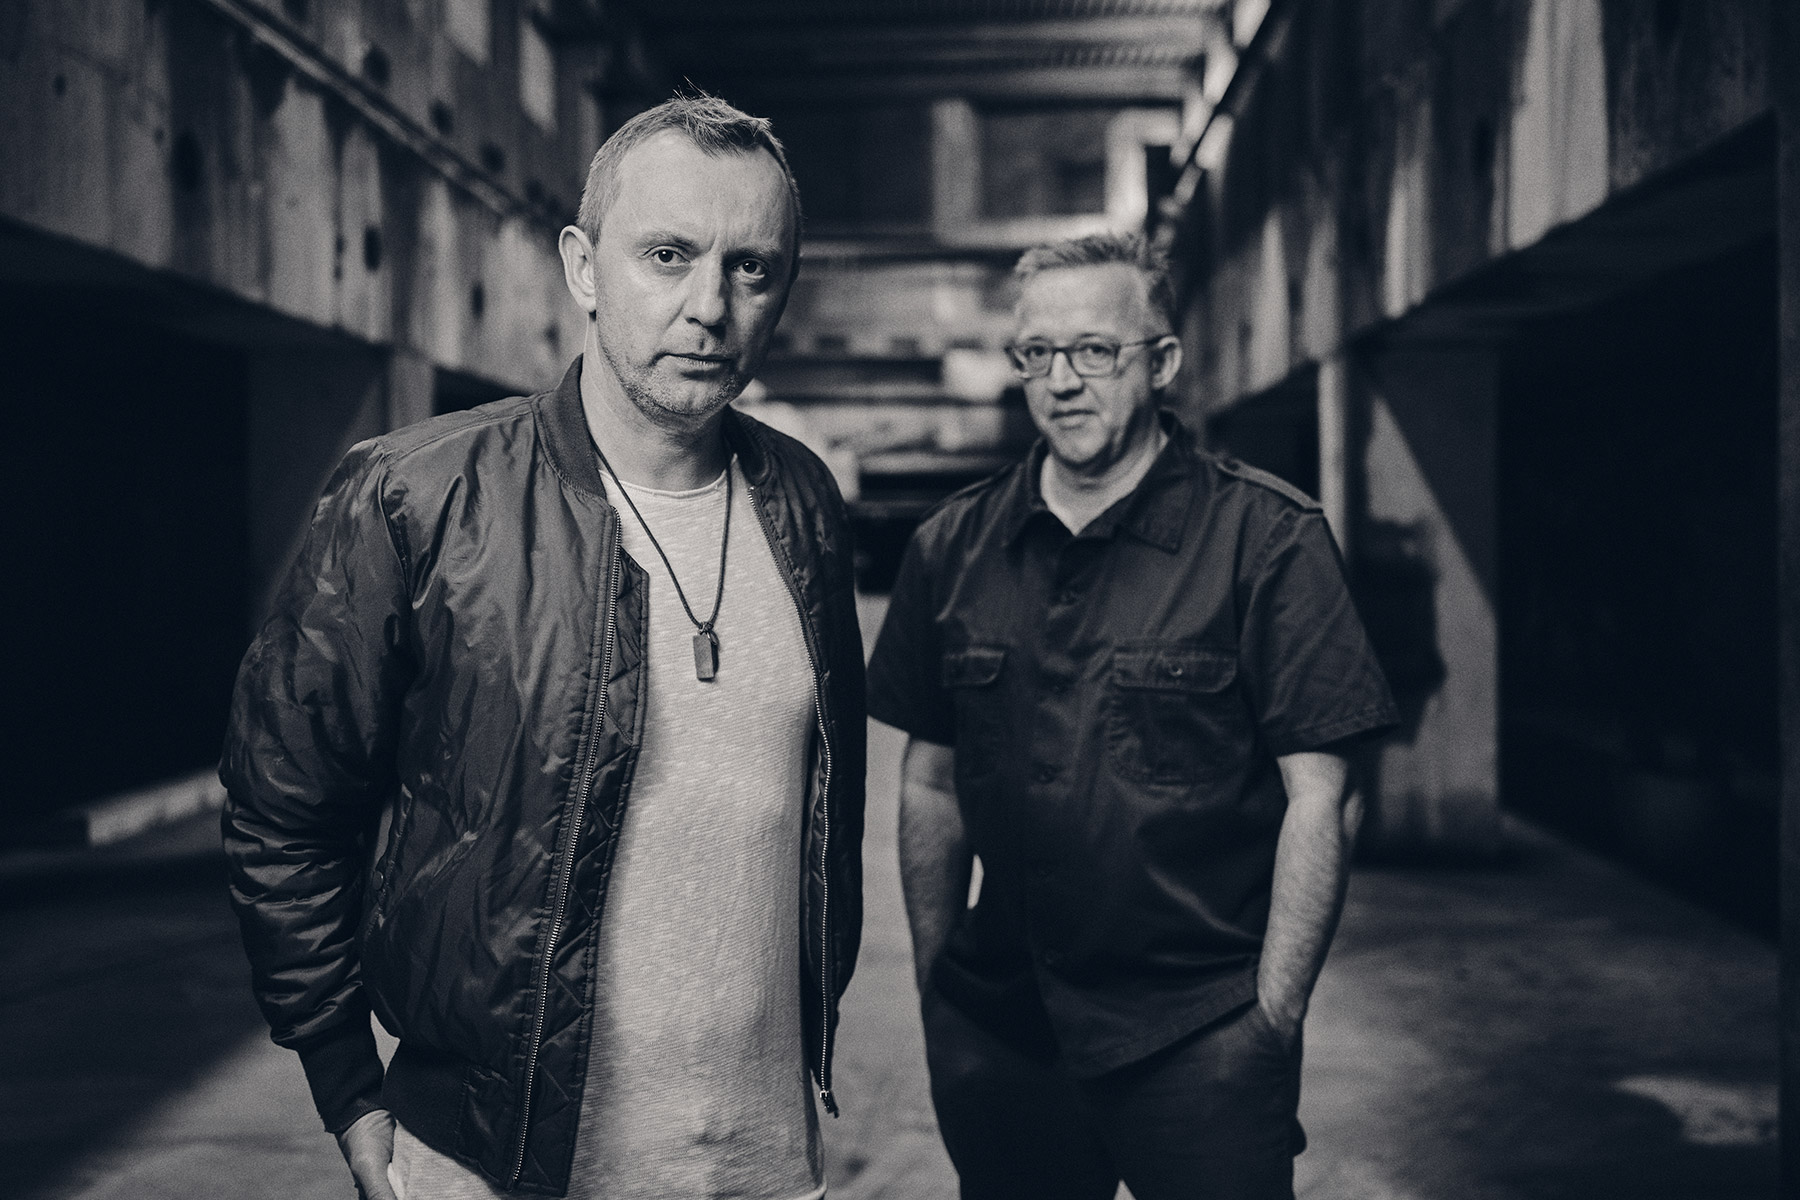 Alex Connors and Hardy Heller: “At the end of the day, it’s still all about music”